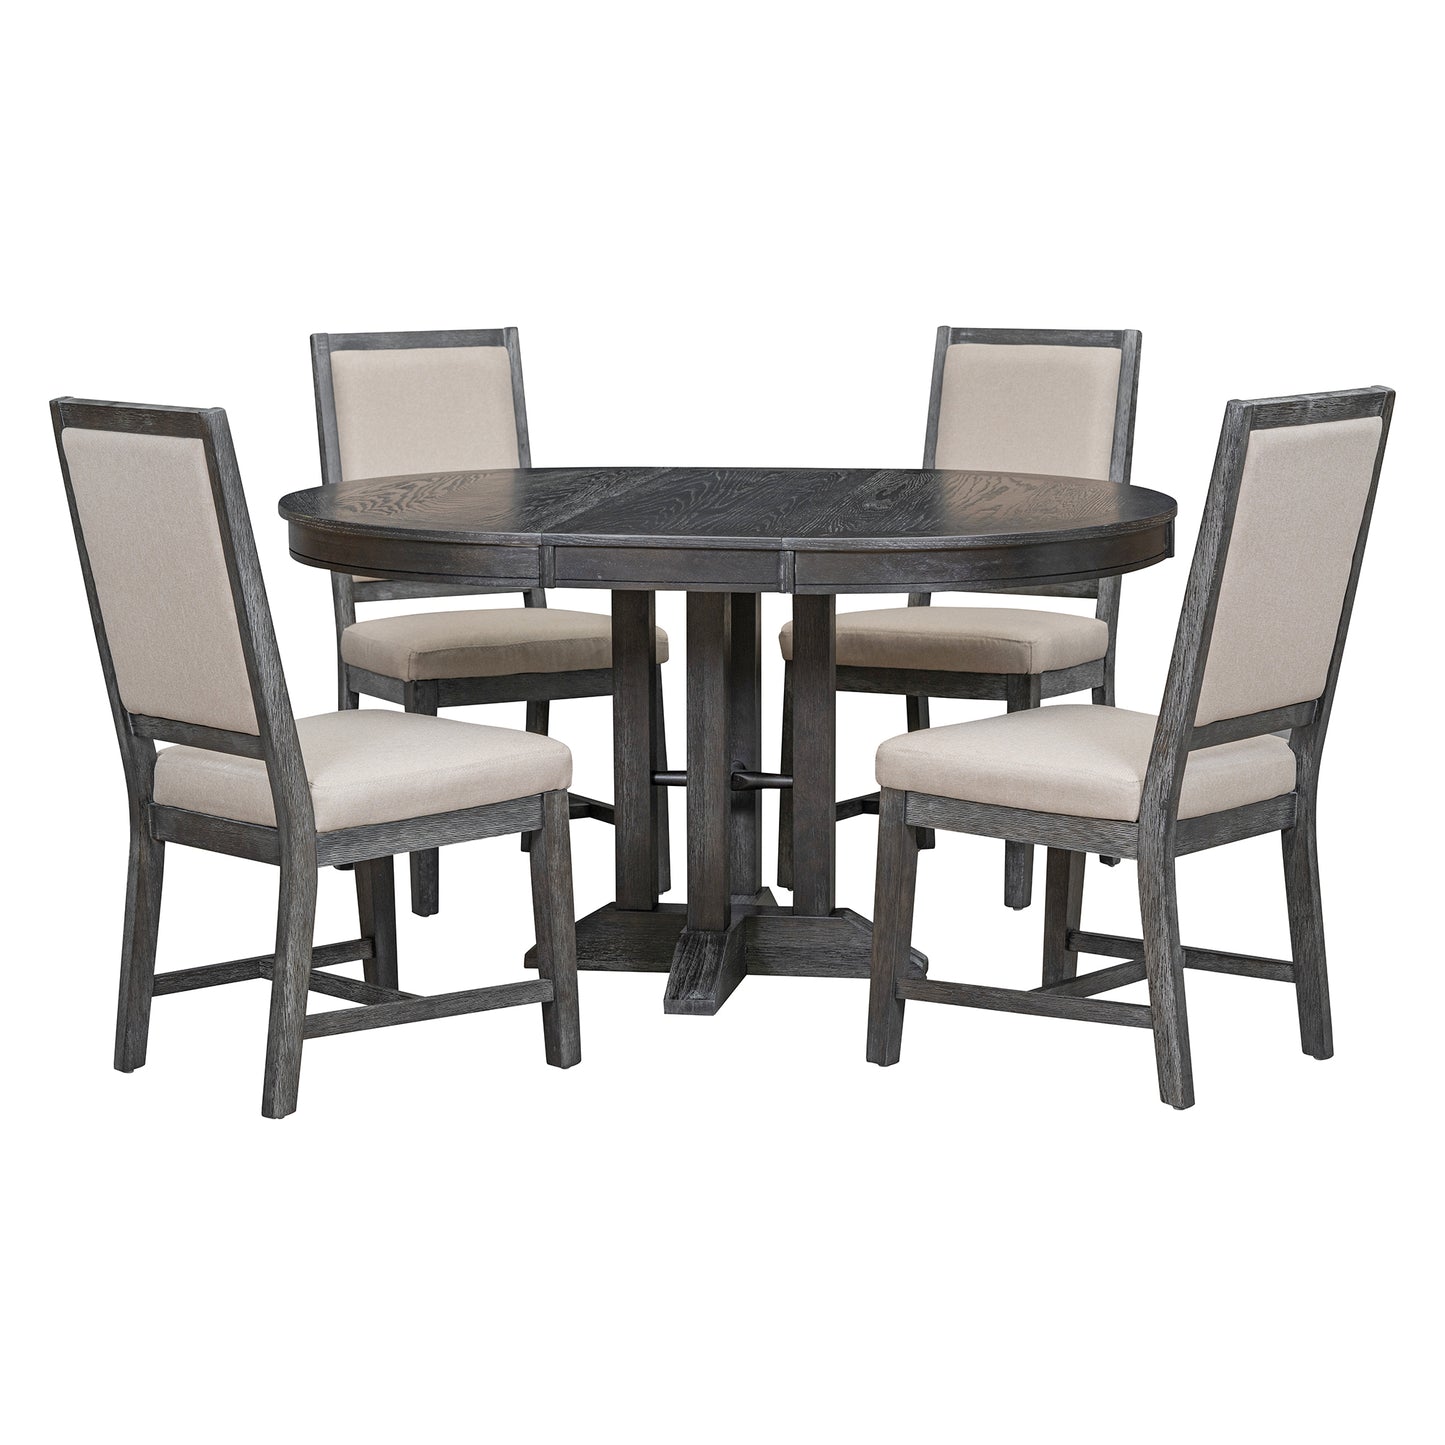 5-Piece Dining Set Extendable Round Table and 4 Upholstered Chairs Farmhouse (Black)